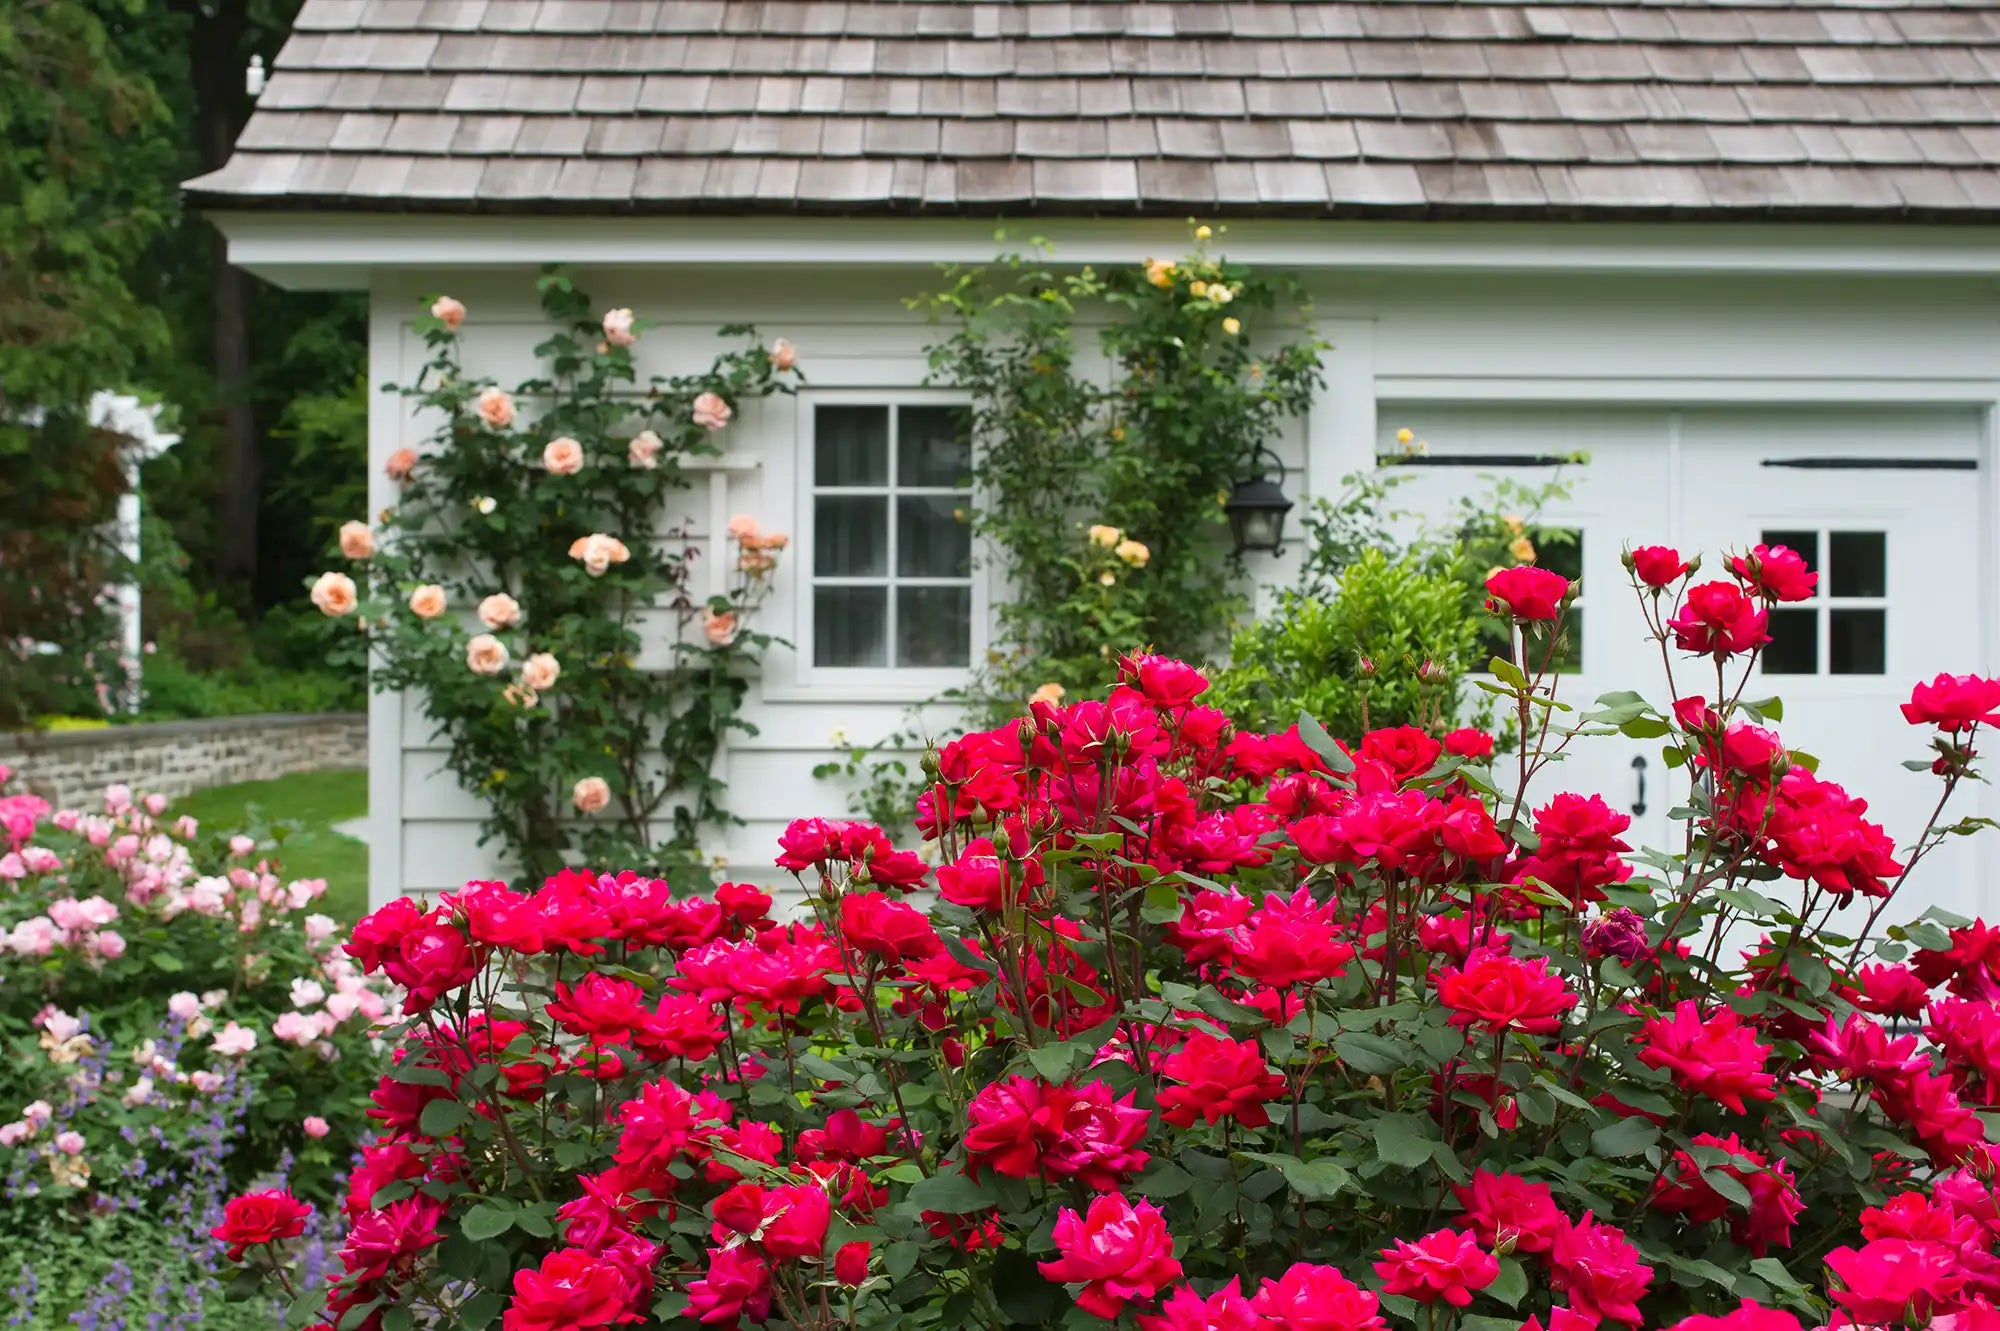 A pair of trellises support pink rose bushes climbing the roof of a rustic white cottage. The foreground is anchored by  Knock Out® Roses. Bunches of them exploding in a  display of brilliant reds and greens.